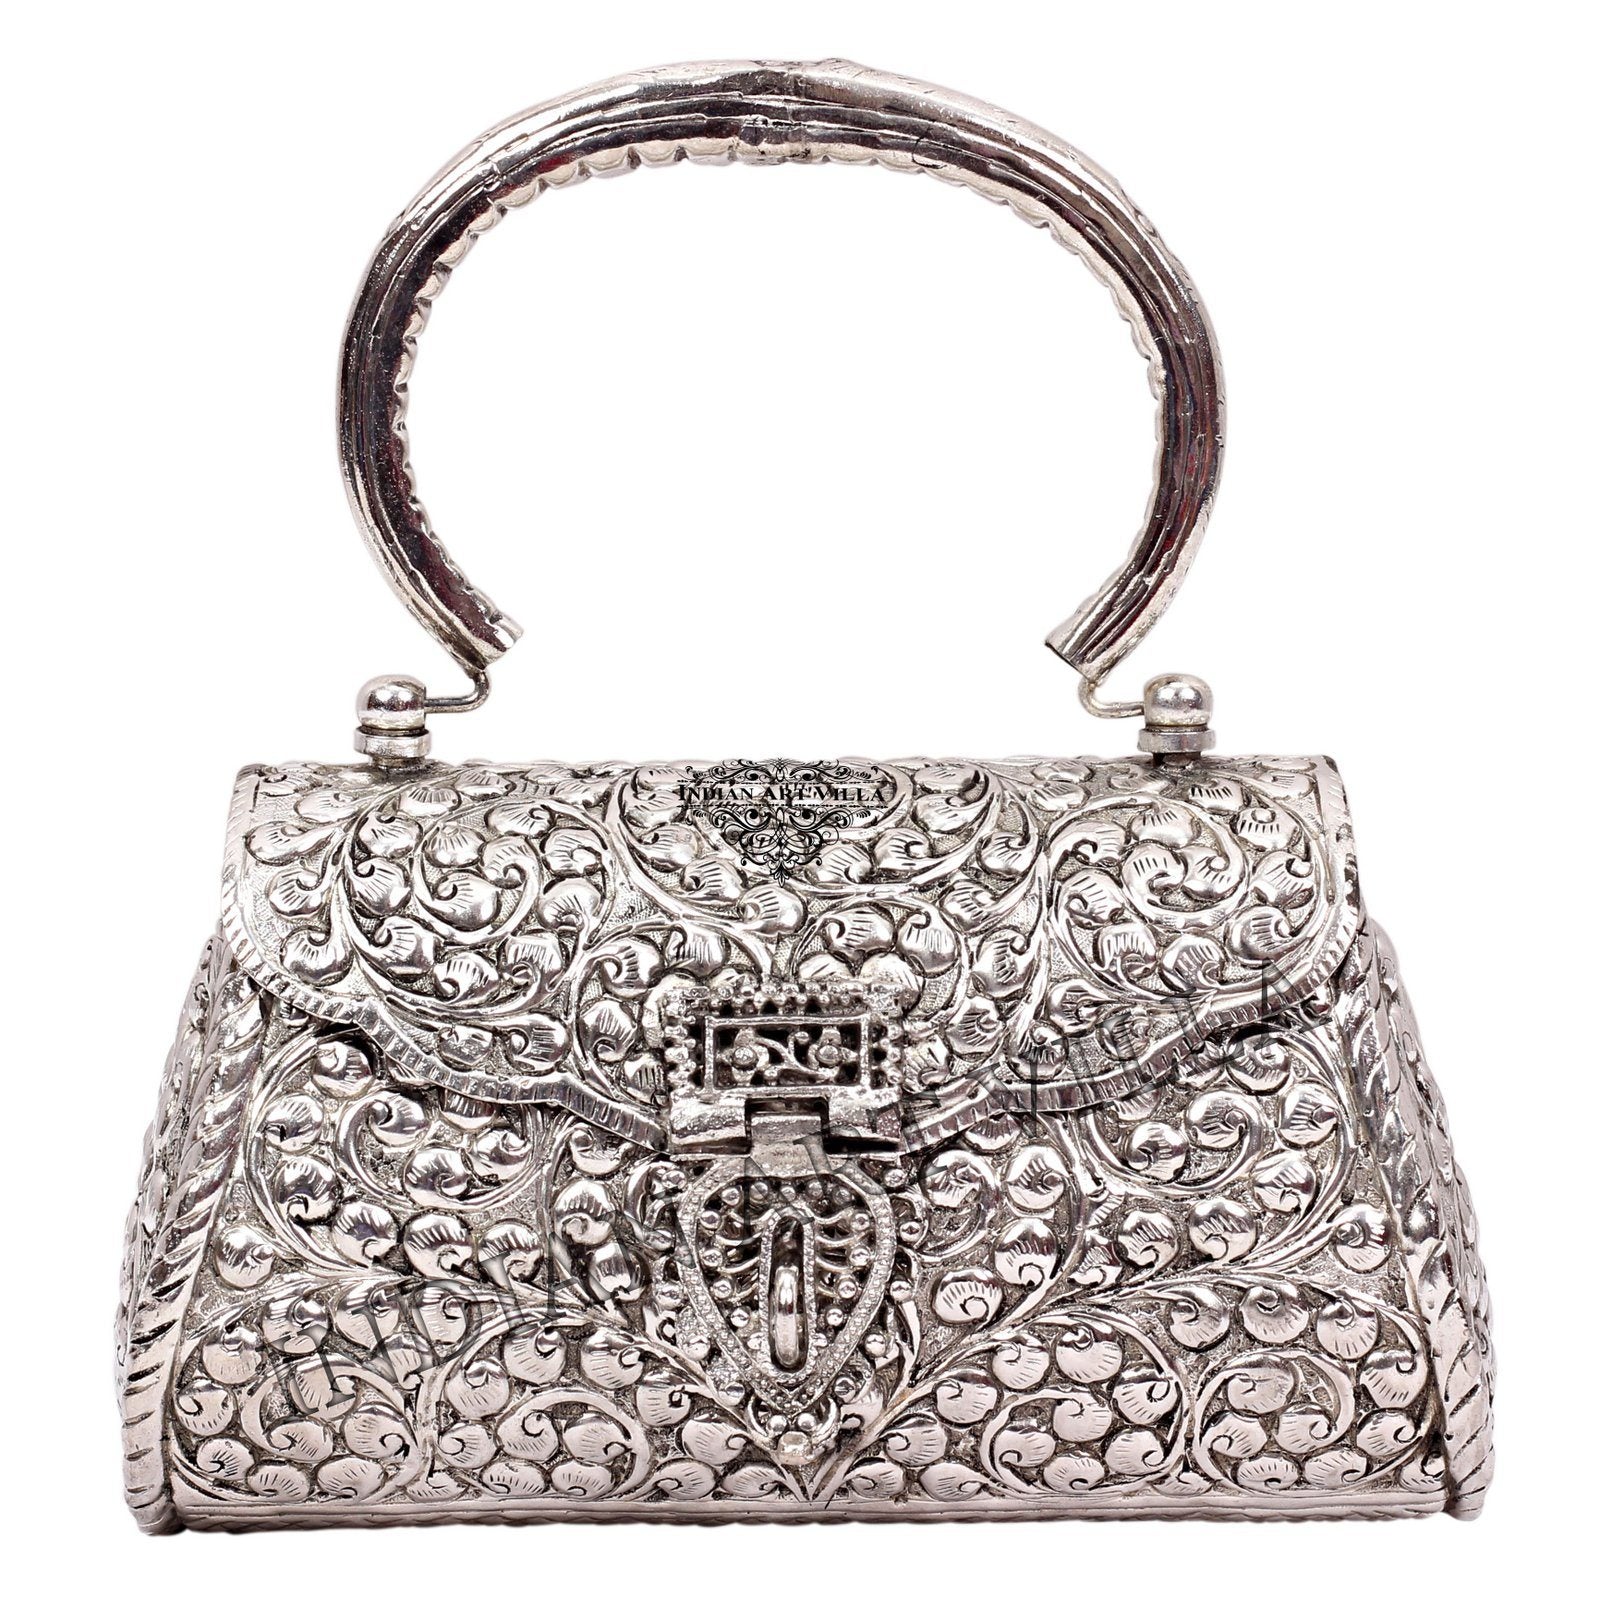 Branded Bags for Women, Ladies Accessories, Handbags for Women